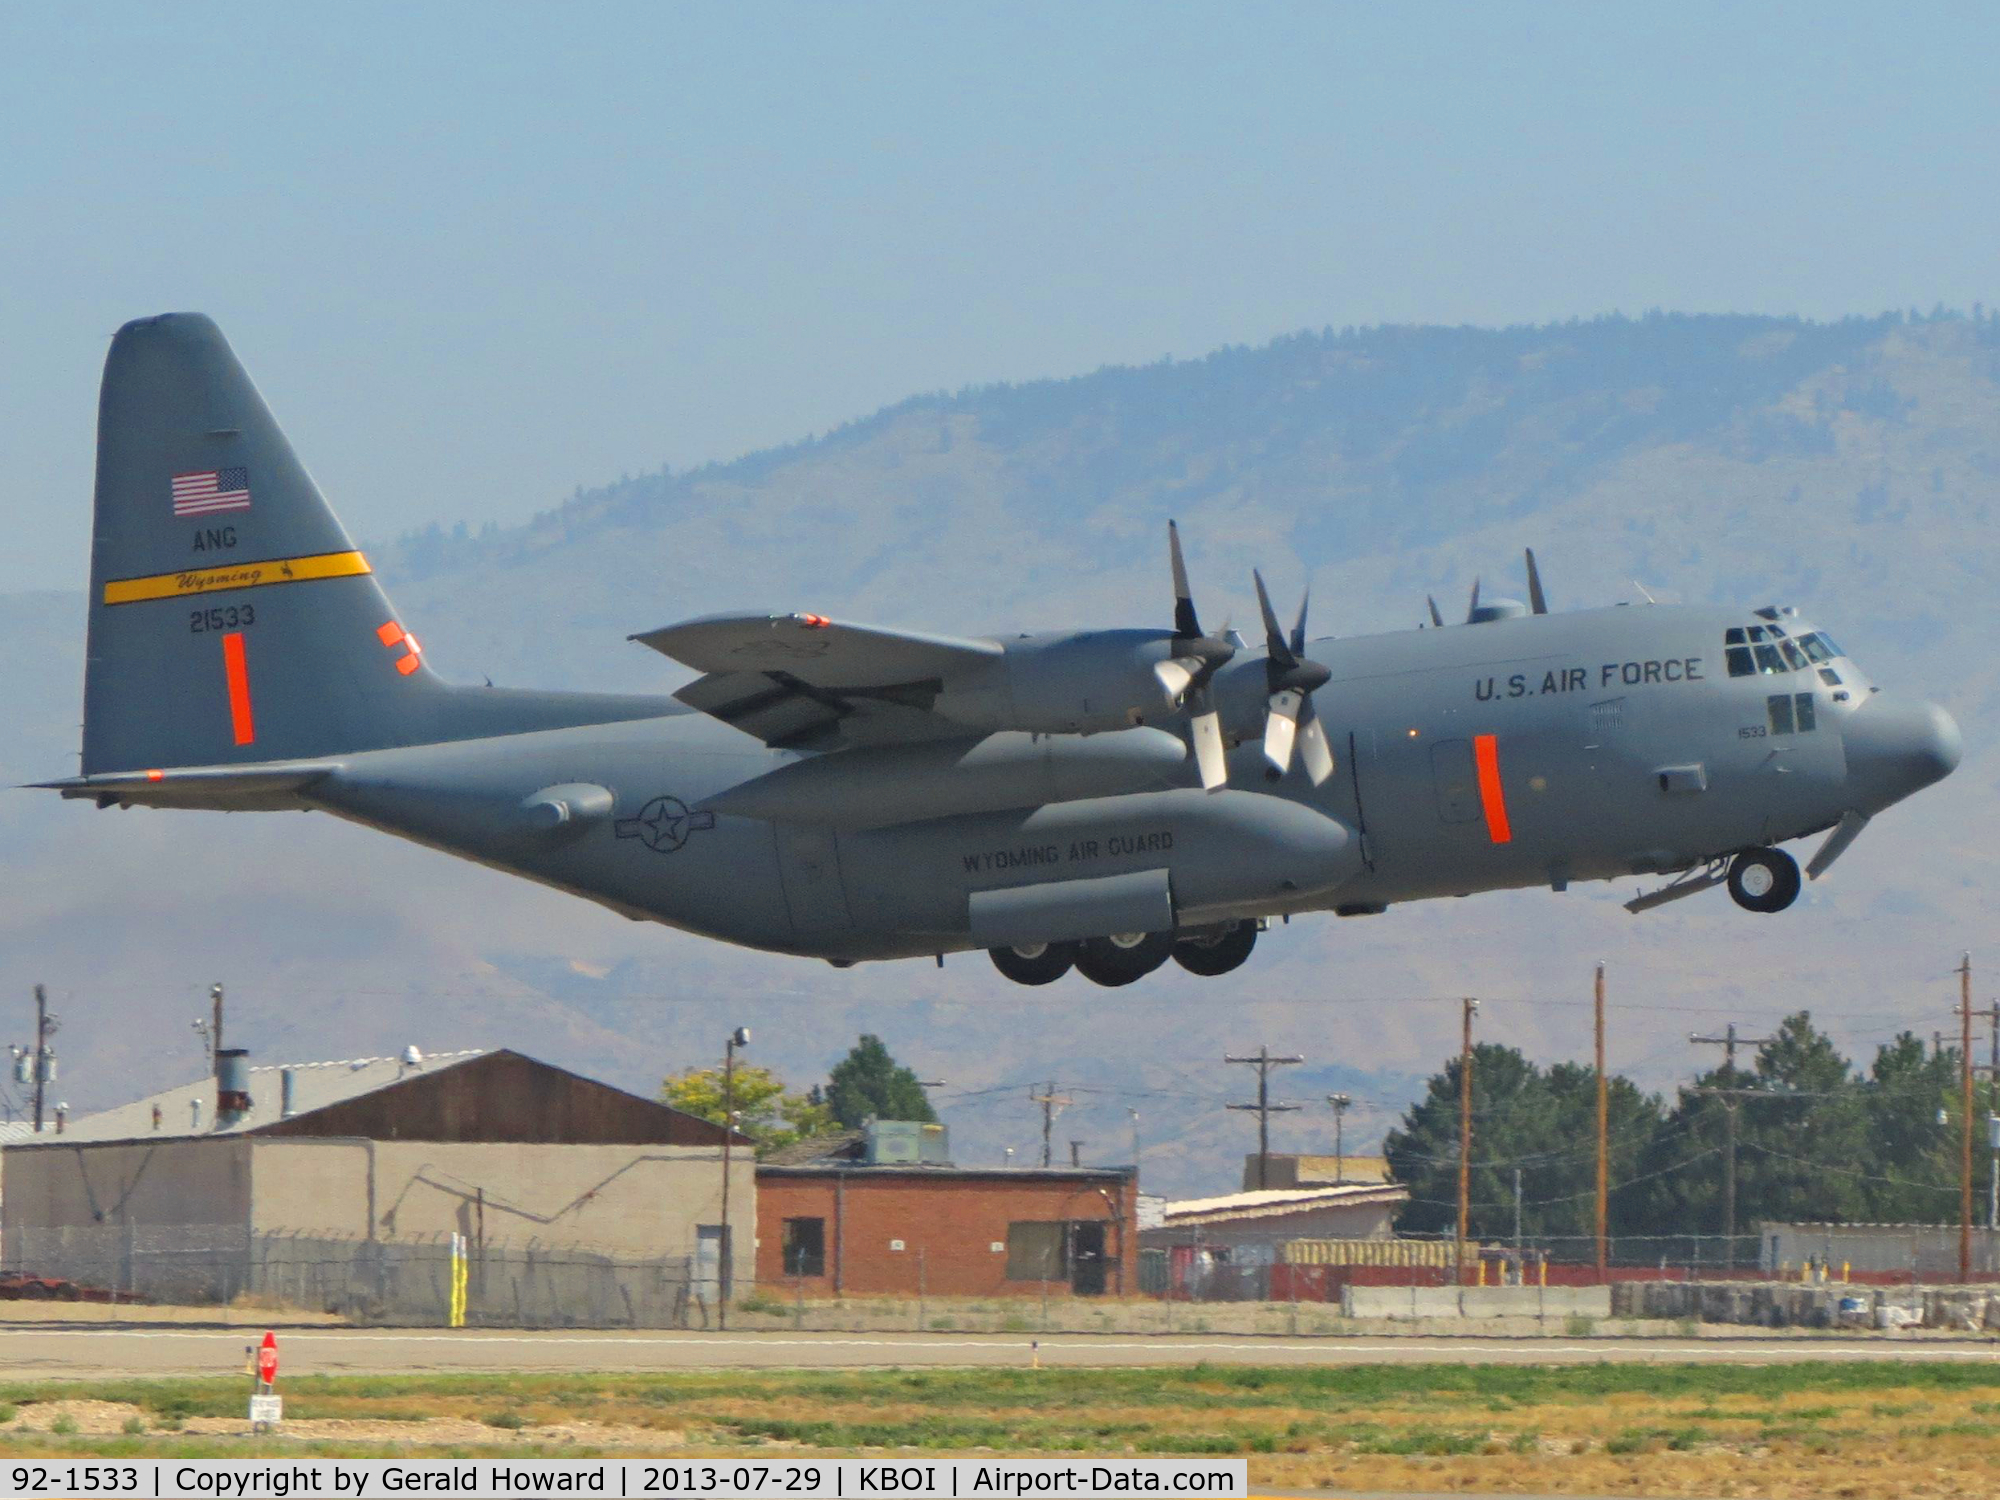 92-1533, 1992 Lockheed C-130H Hercules C/N 382-5322, Tanker 1 departing RWY 10L for fire mission. MAFFS equipped. Wyoming ANG.